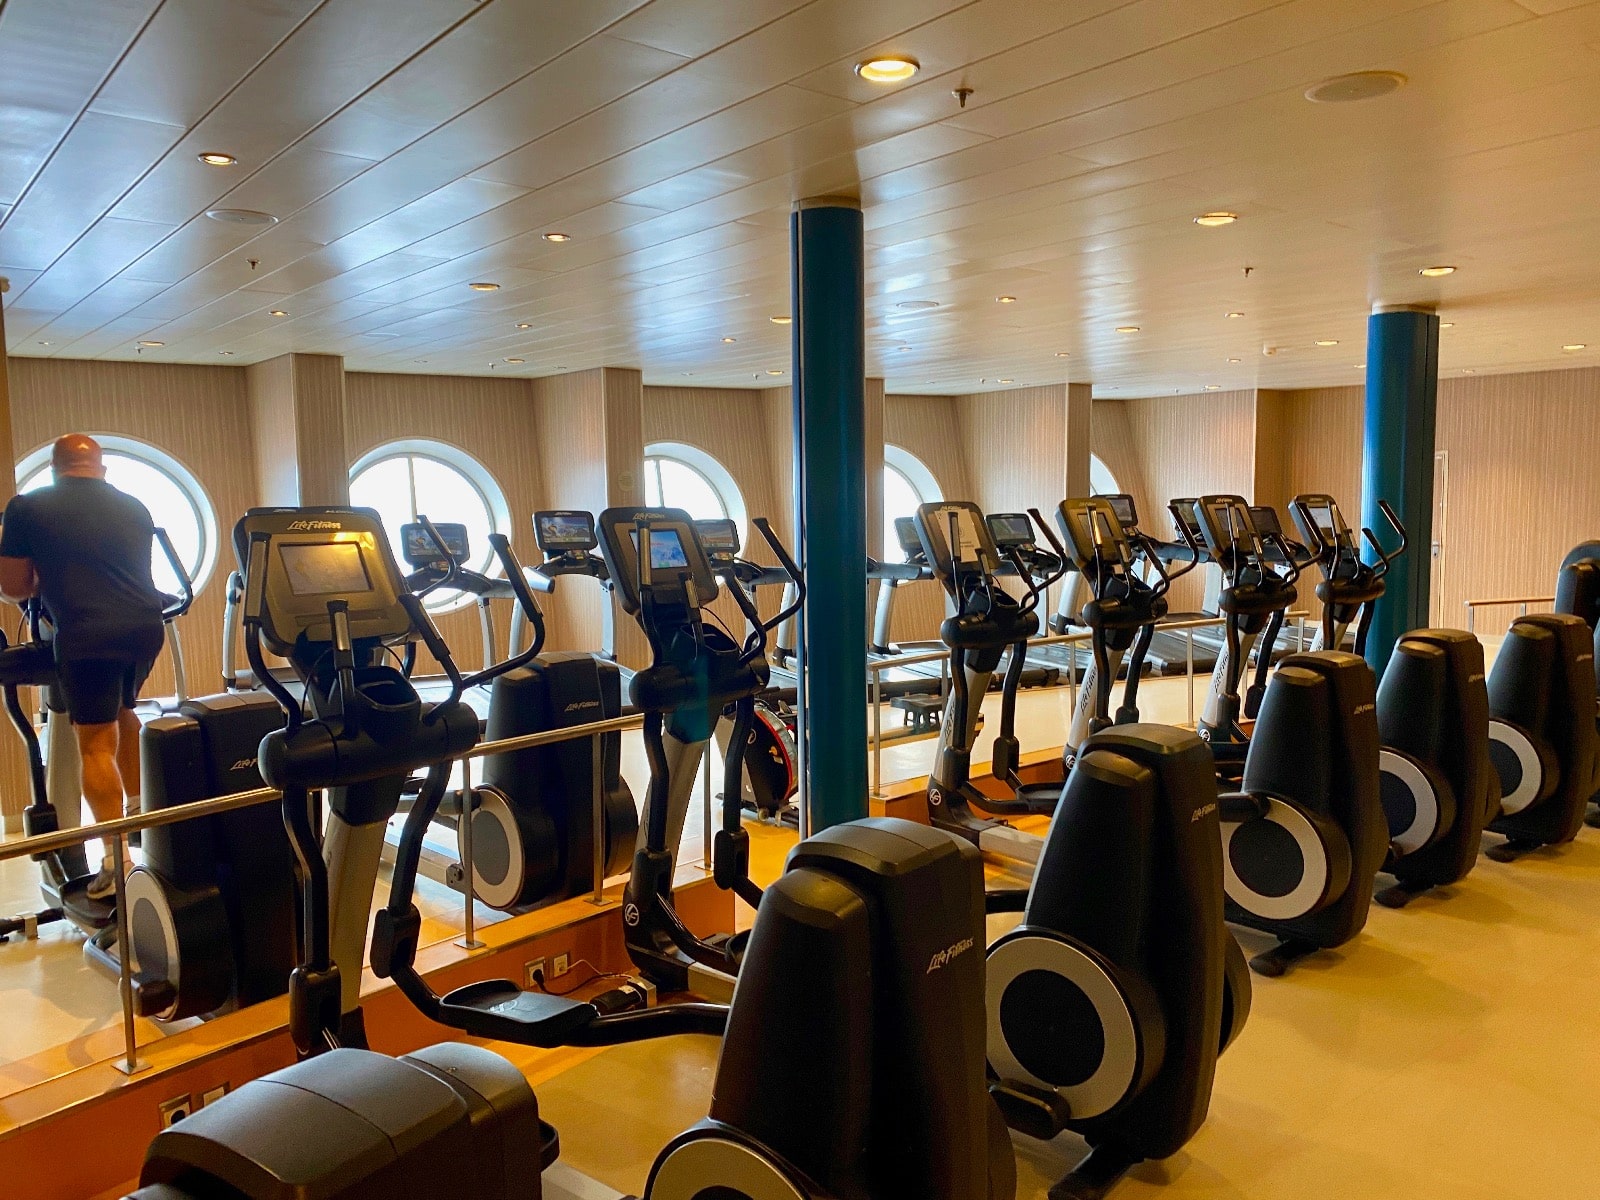 a room with exercise machines and windows